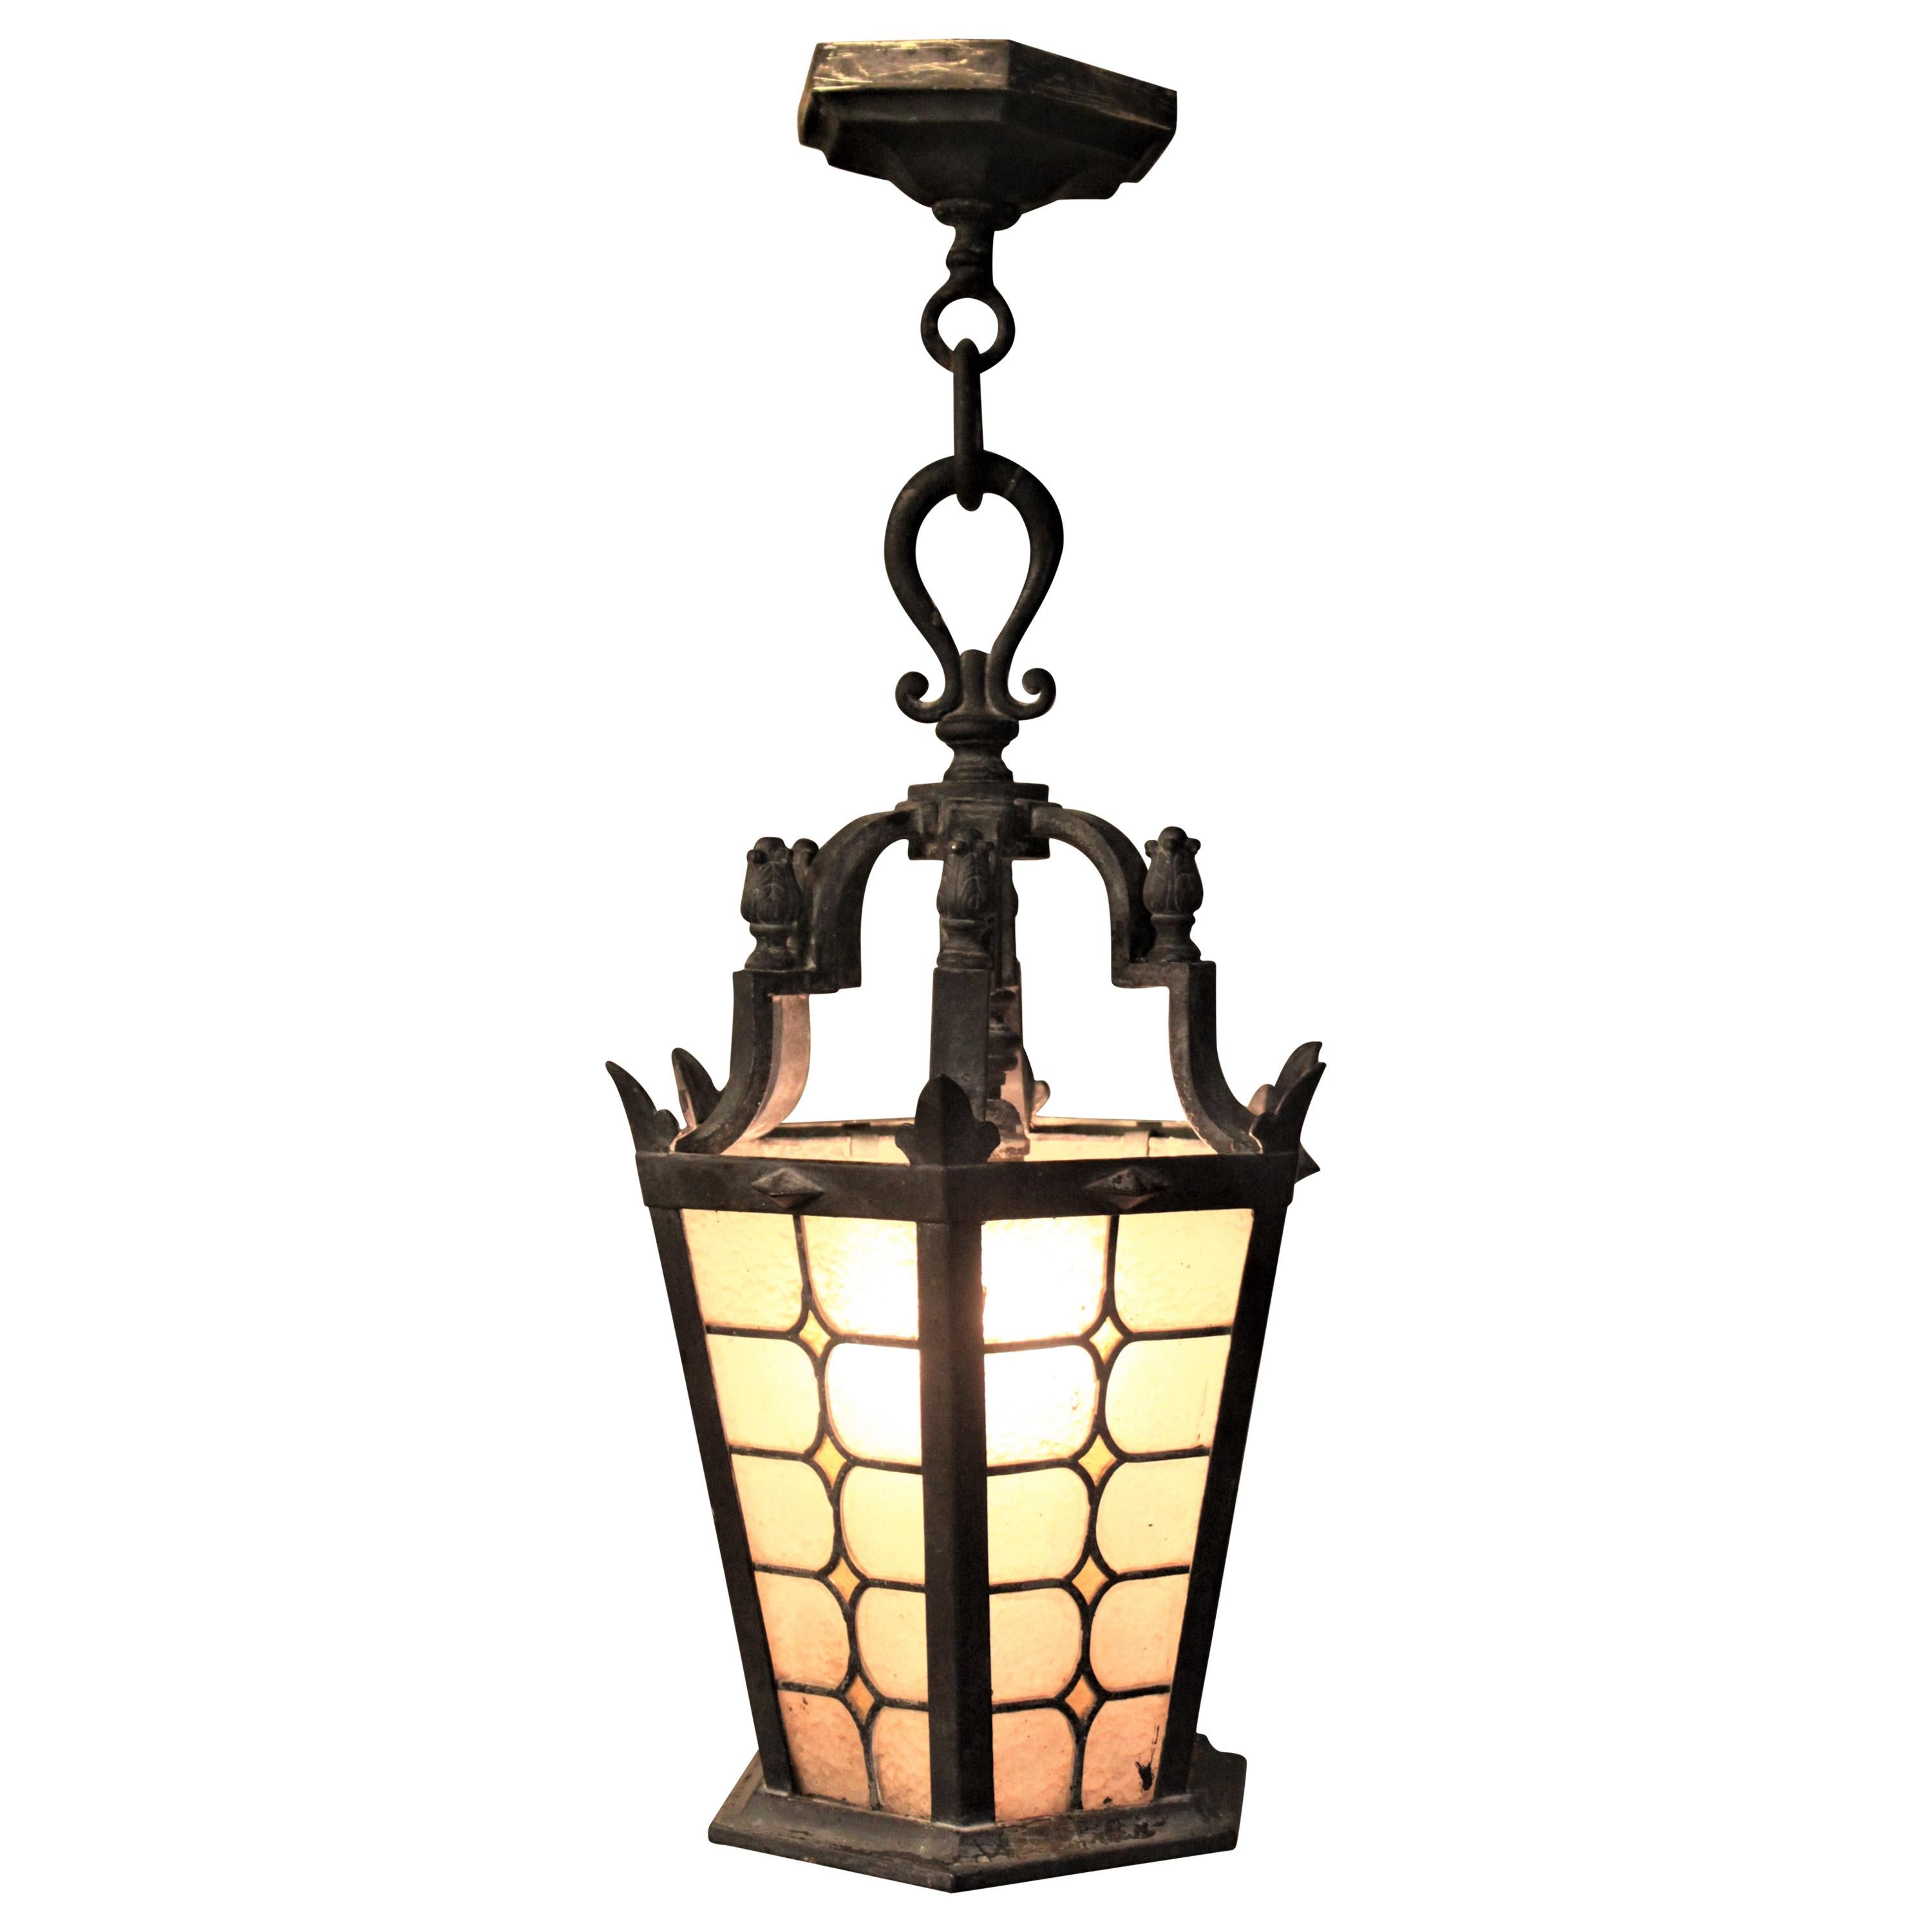 Antique Cast Bronze Outdoor Pendant Light Fixture with Stained Glass Panels For Sale